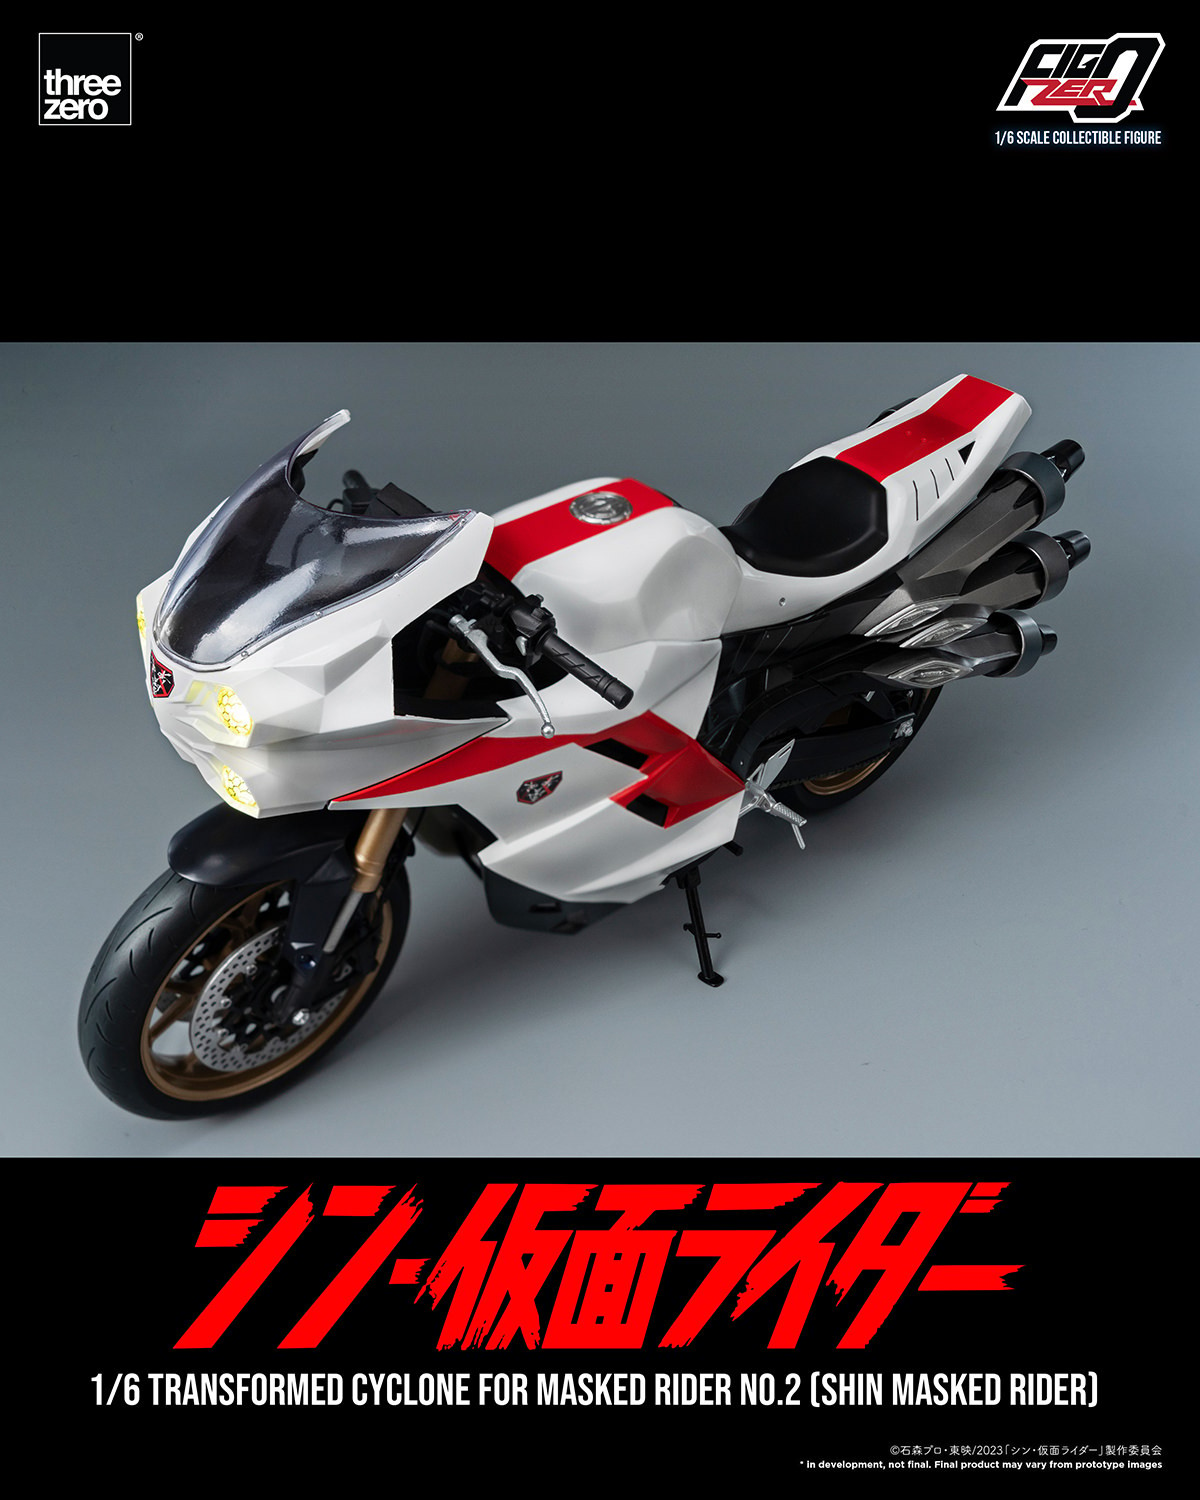 Transformed Cyclone for Masked Rider No. 2 (Shin Masked Rider) (Prototype Shown) View 7